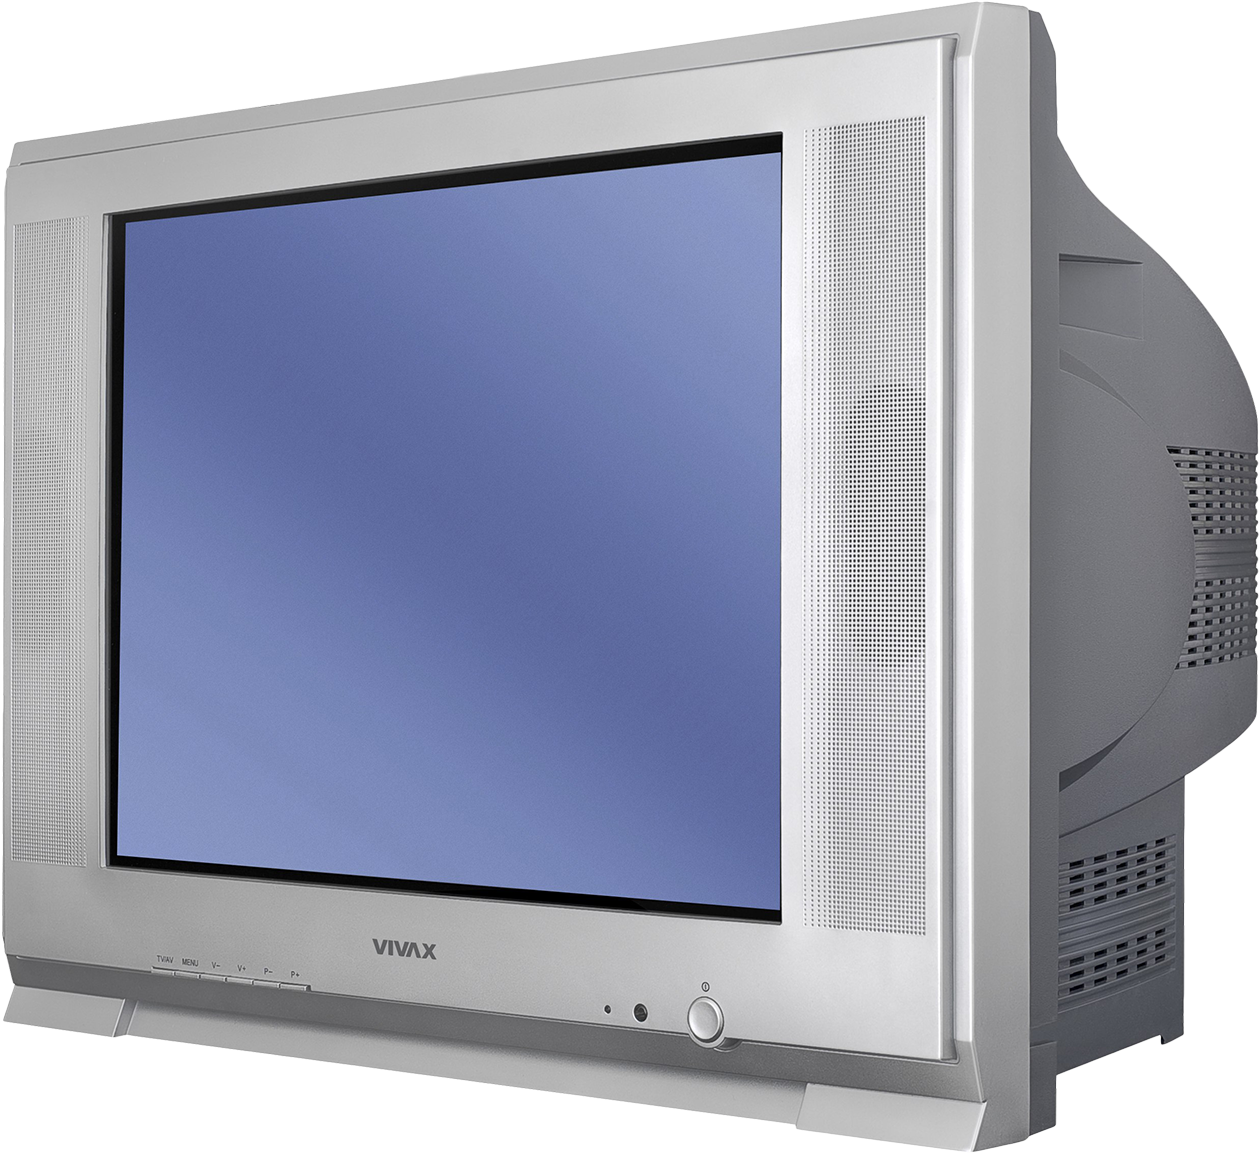 A White Television With A Blue Screen